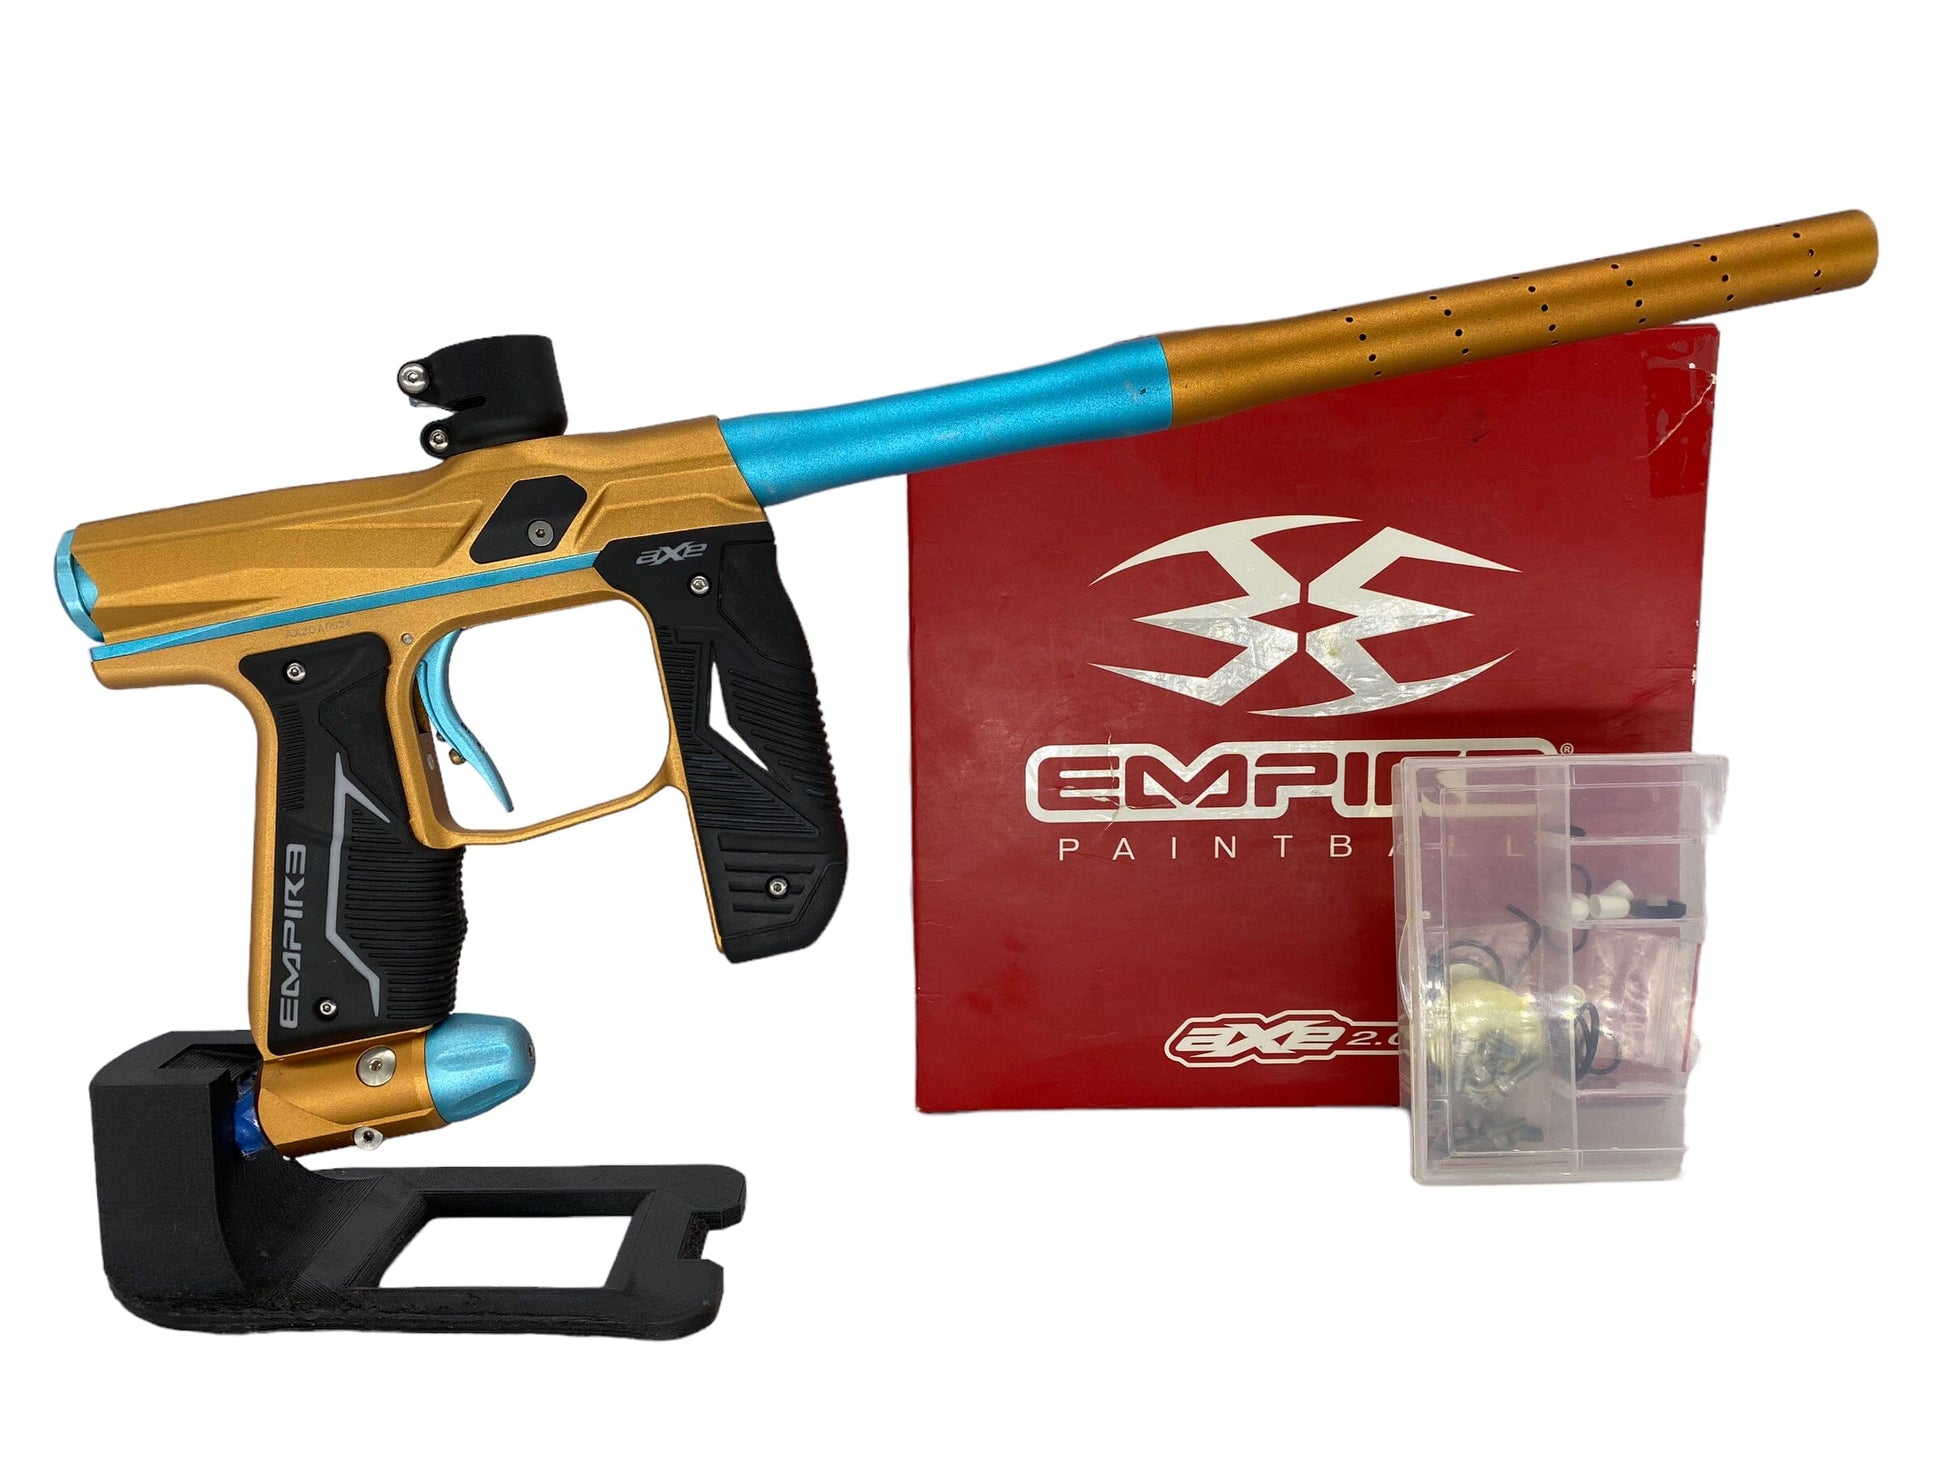 Used Empire Axe 2.0 Paintball Gun from CPXBrosPaintball Buy/Sell/Trade Paintball Markers, Paintball Hoppers, Paintball Masks, and Hormesis Headbands